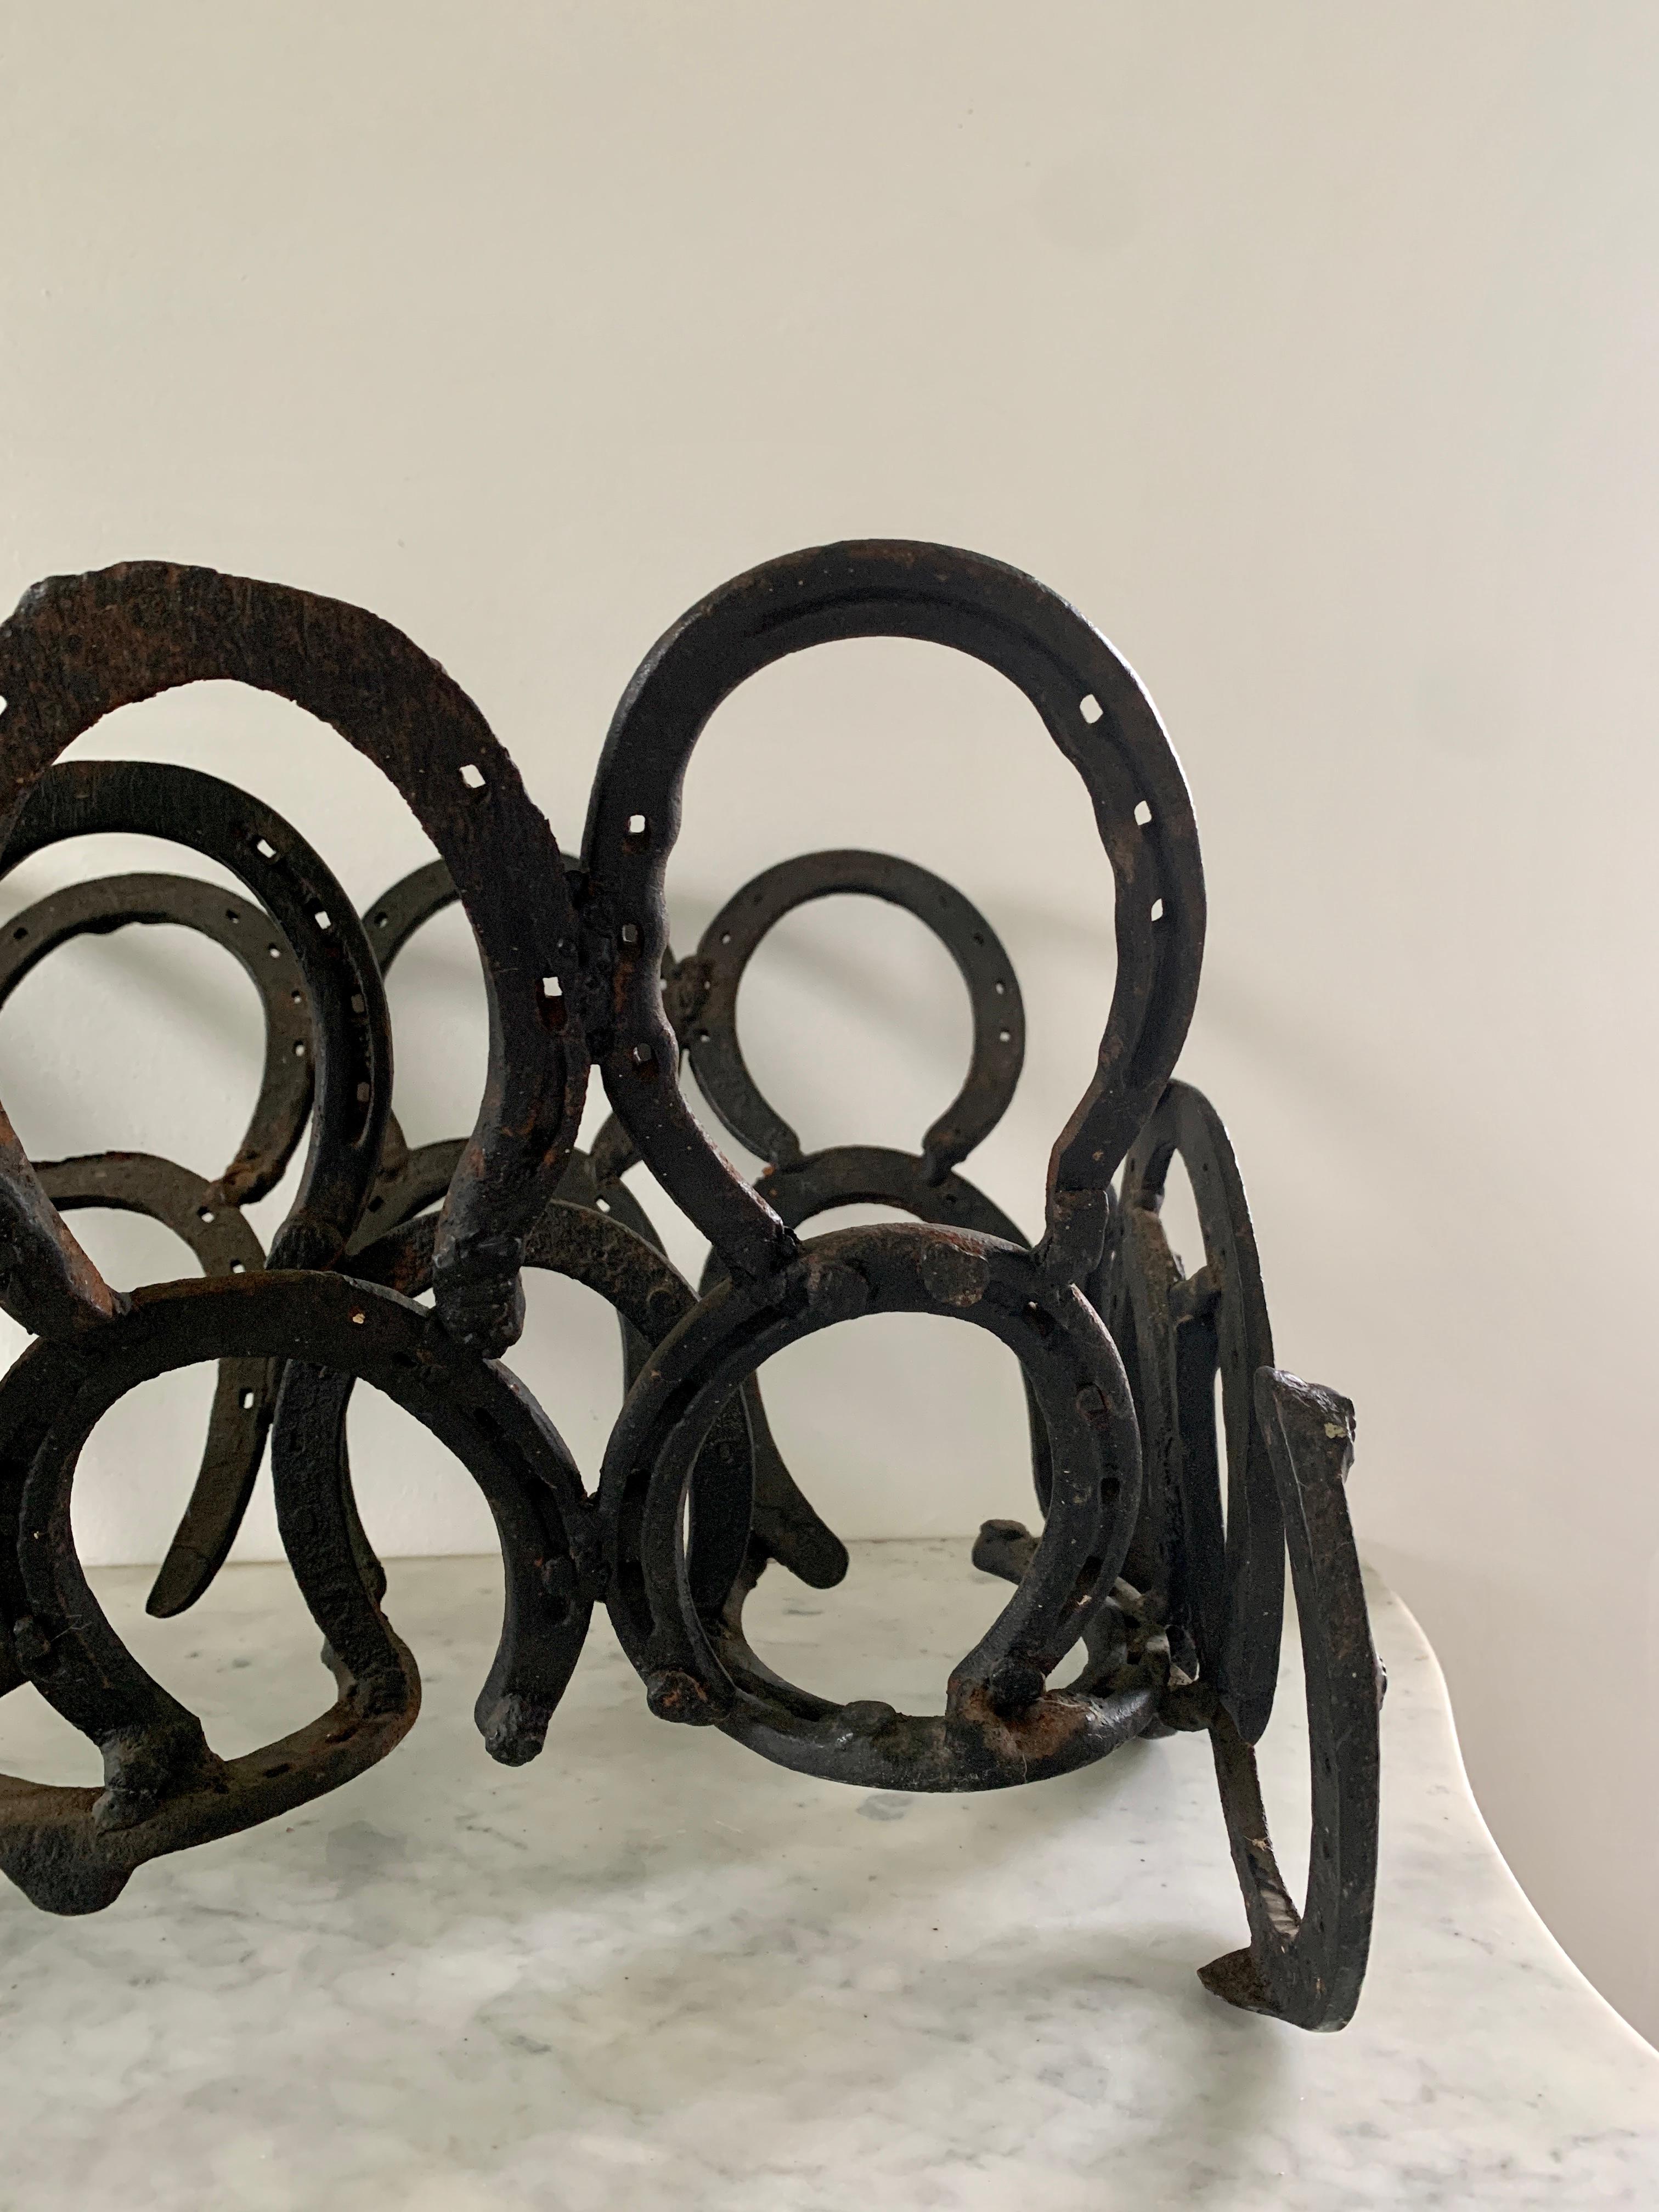 20th Century Vintage Equestrian Hand Forged Cast Iron Horseshoe Magazine Rack or Book Stand For Sale